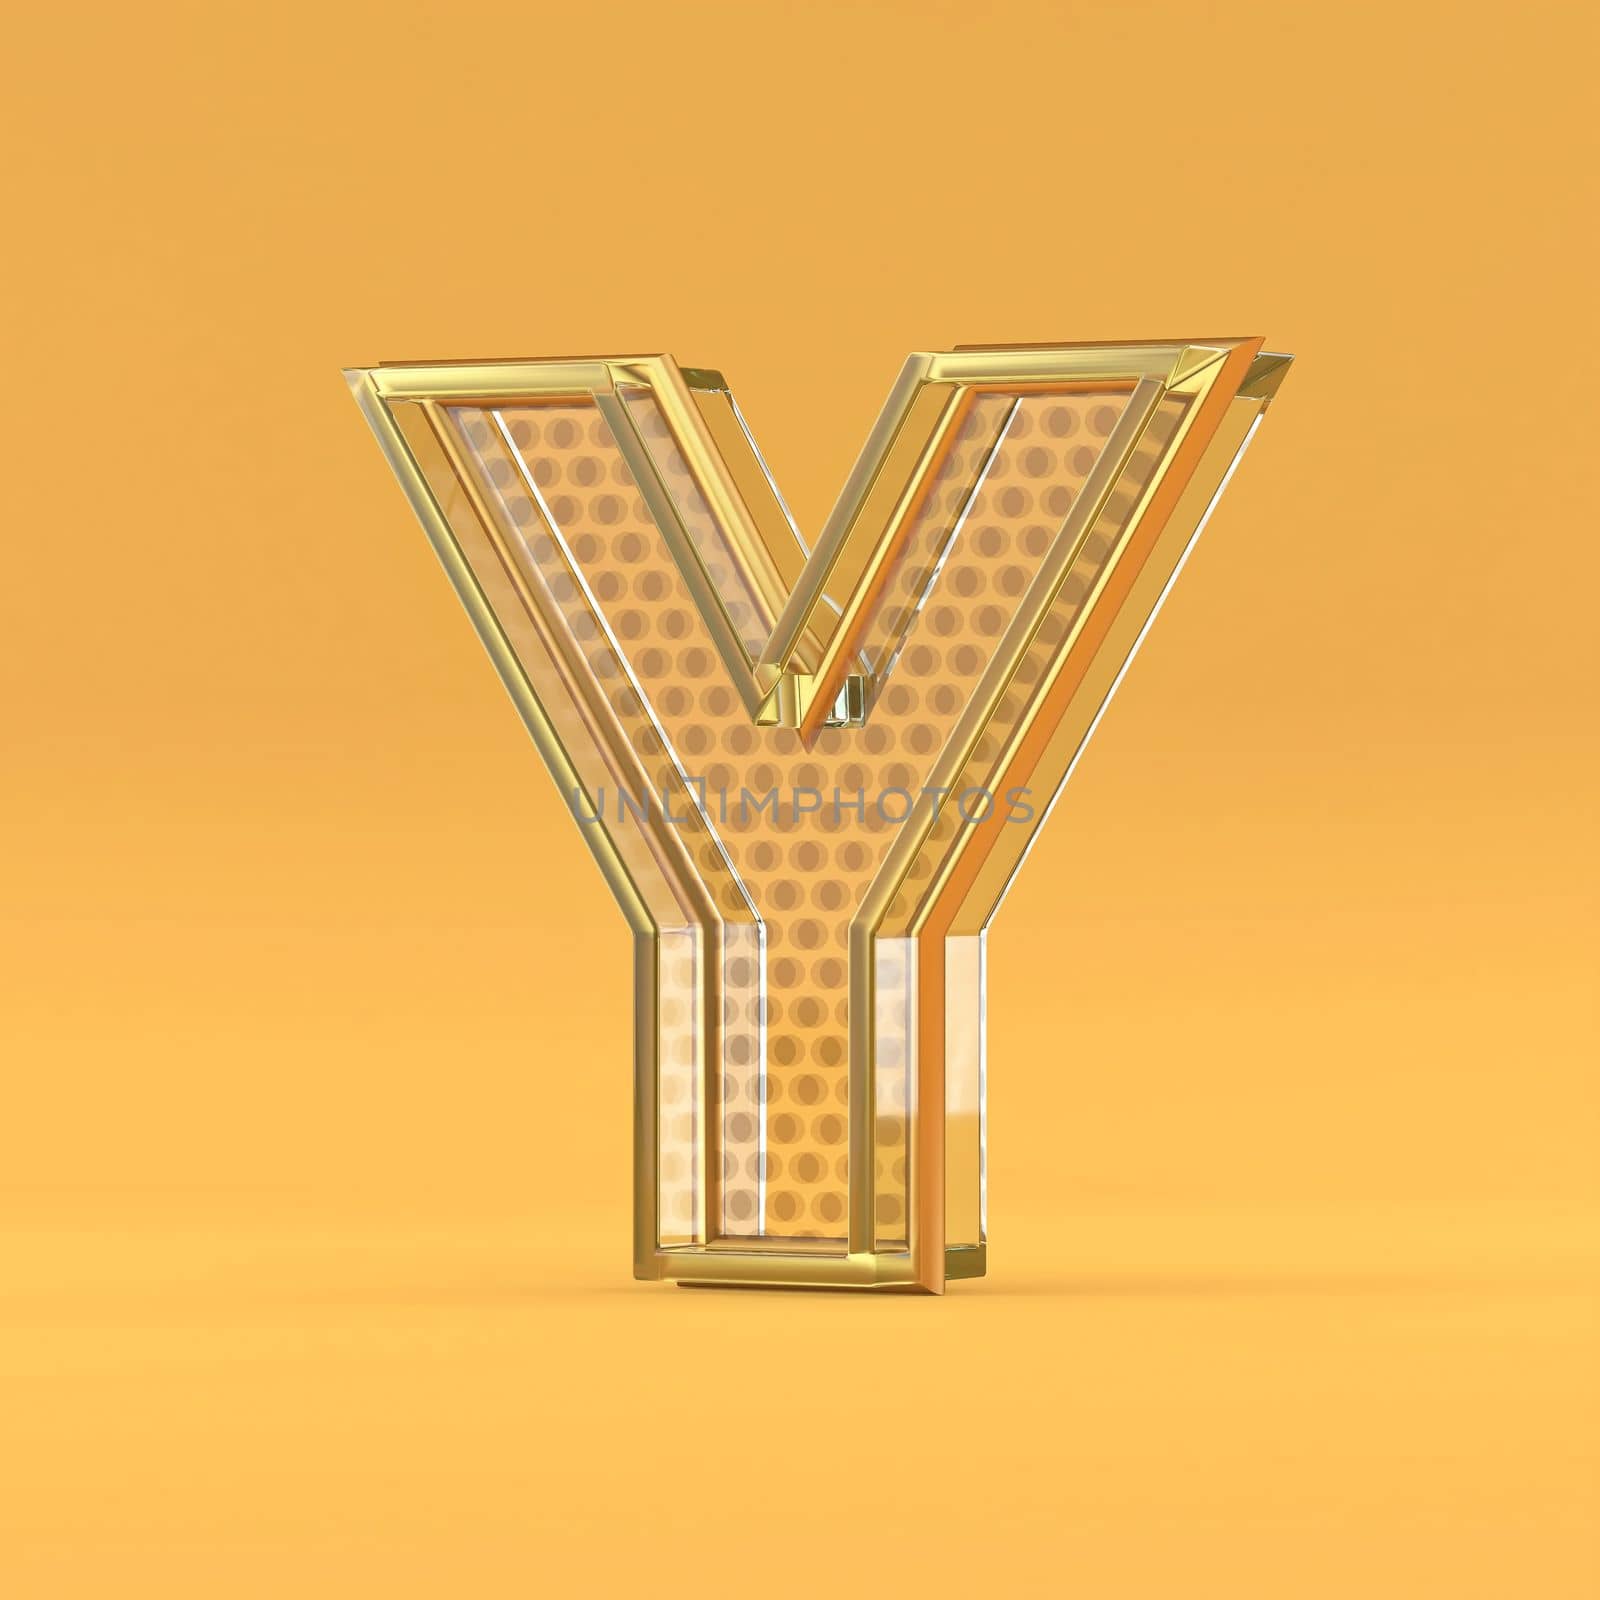 Gold wire and glass font letter Y 3D rendering illustration isolated on orange background